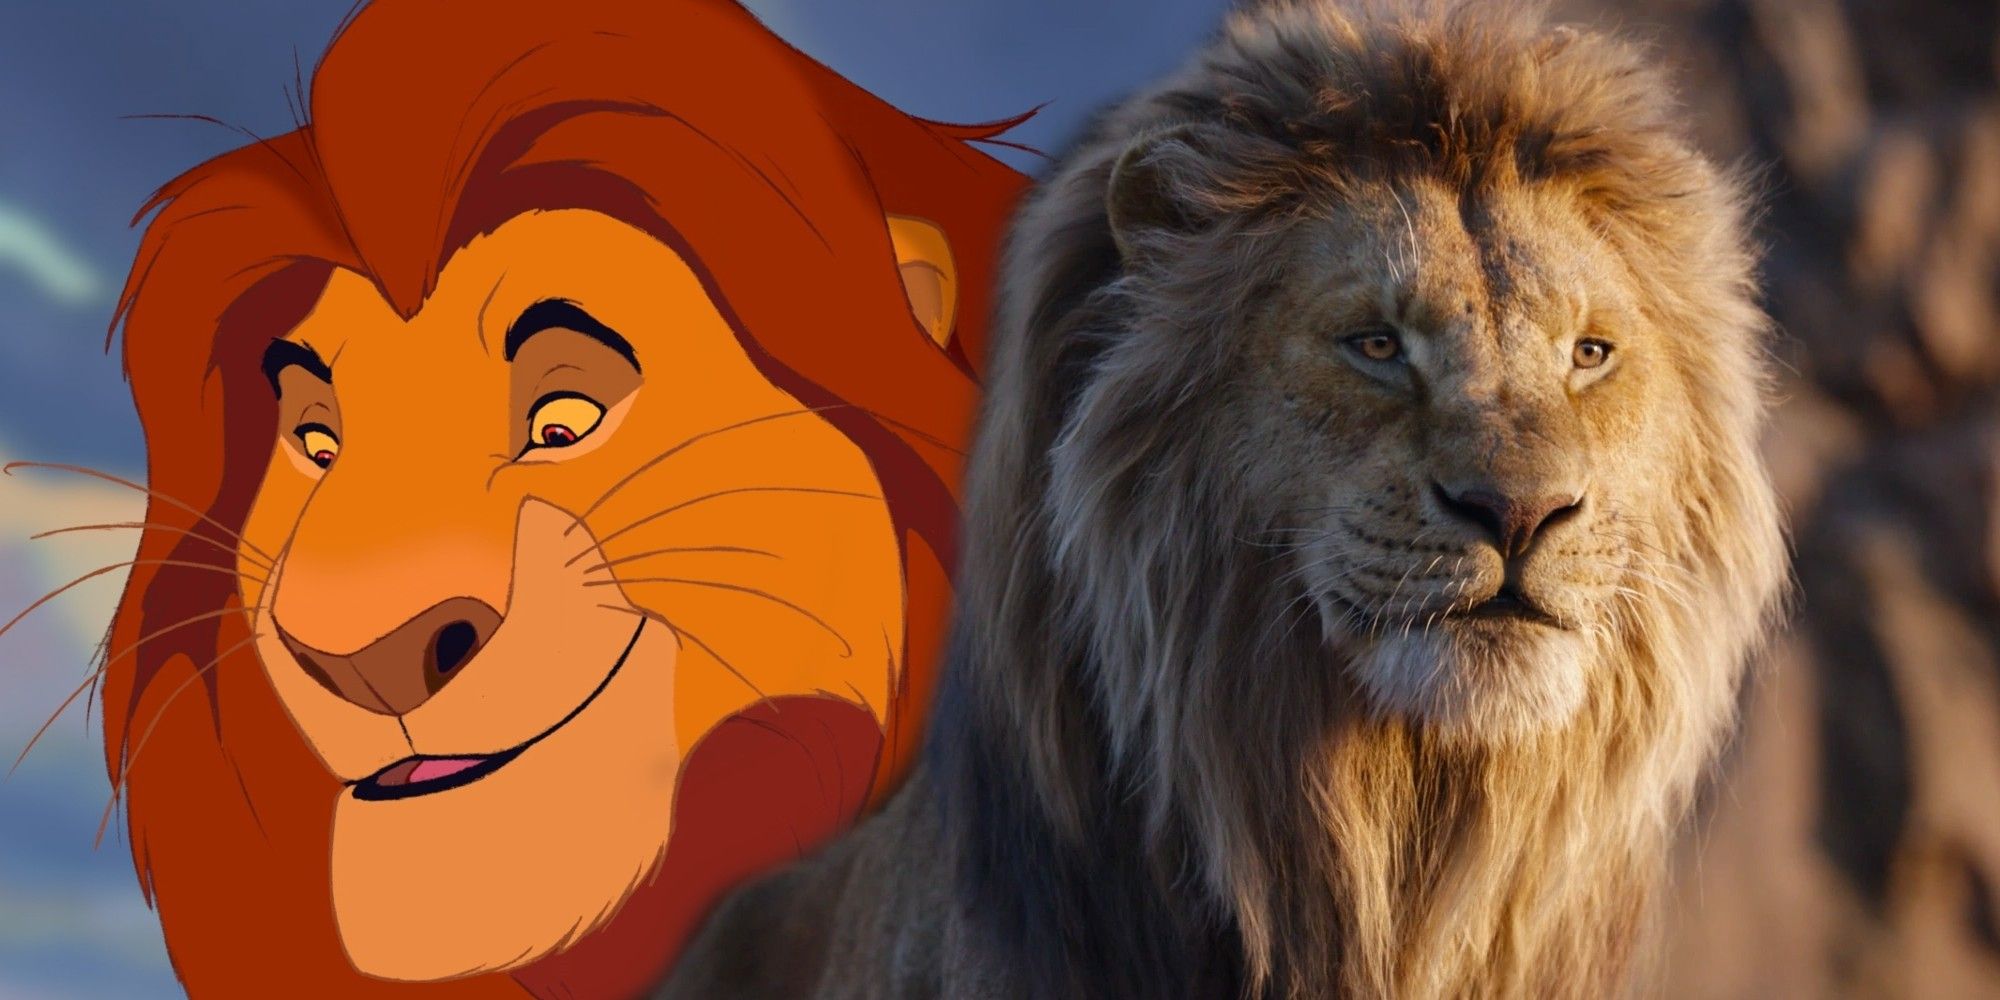 Lion King 2019 Reused 1994 Dialogue, Reveals New Video